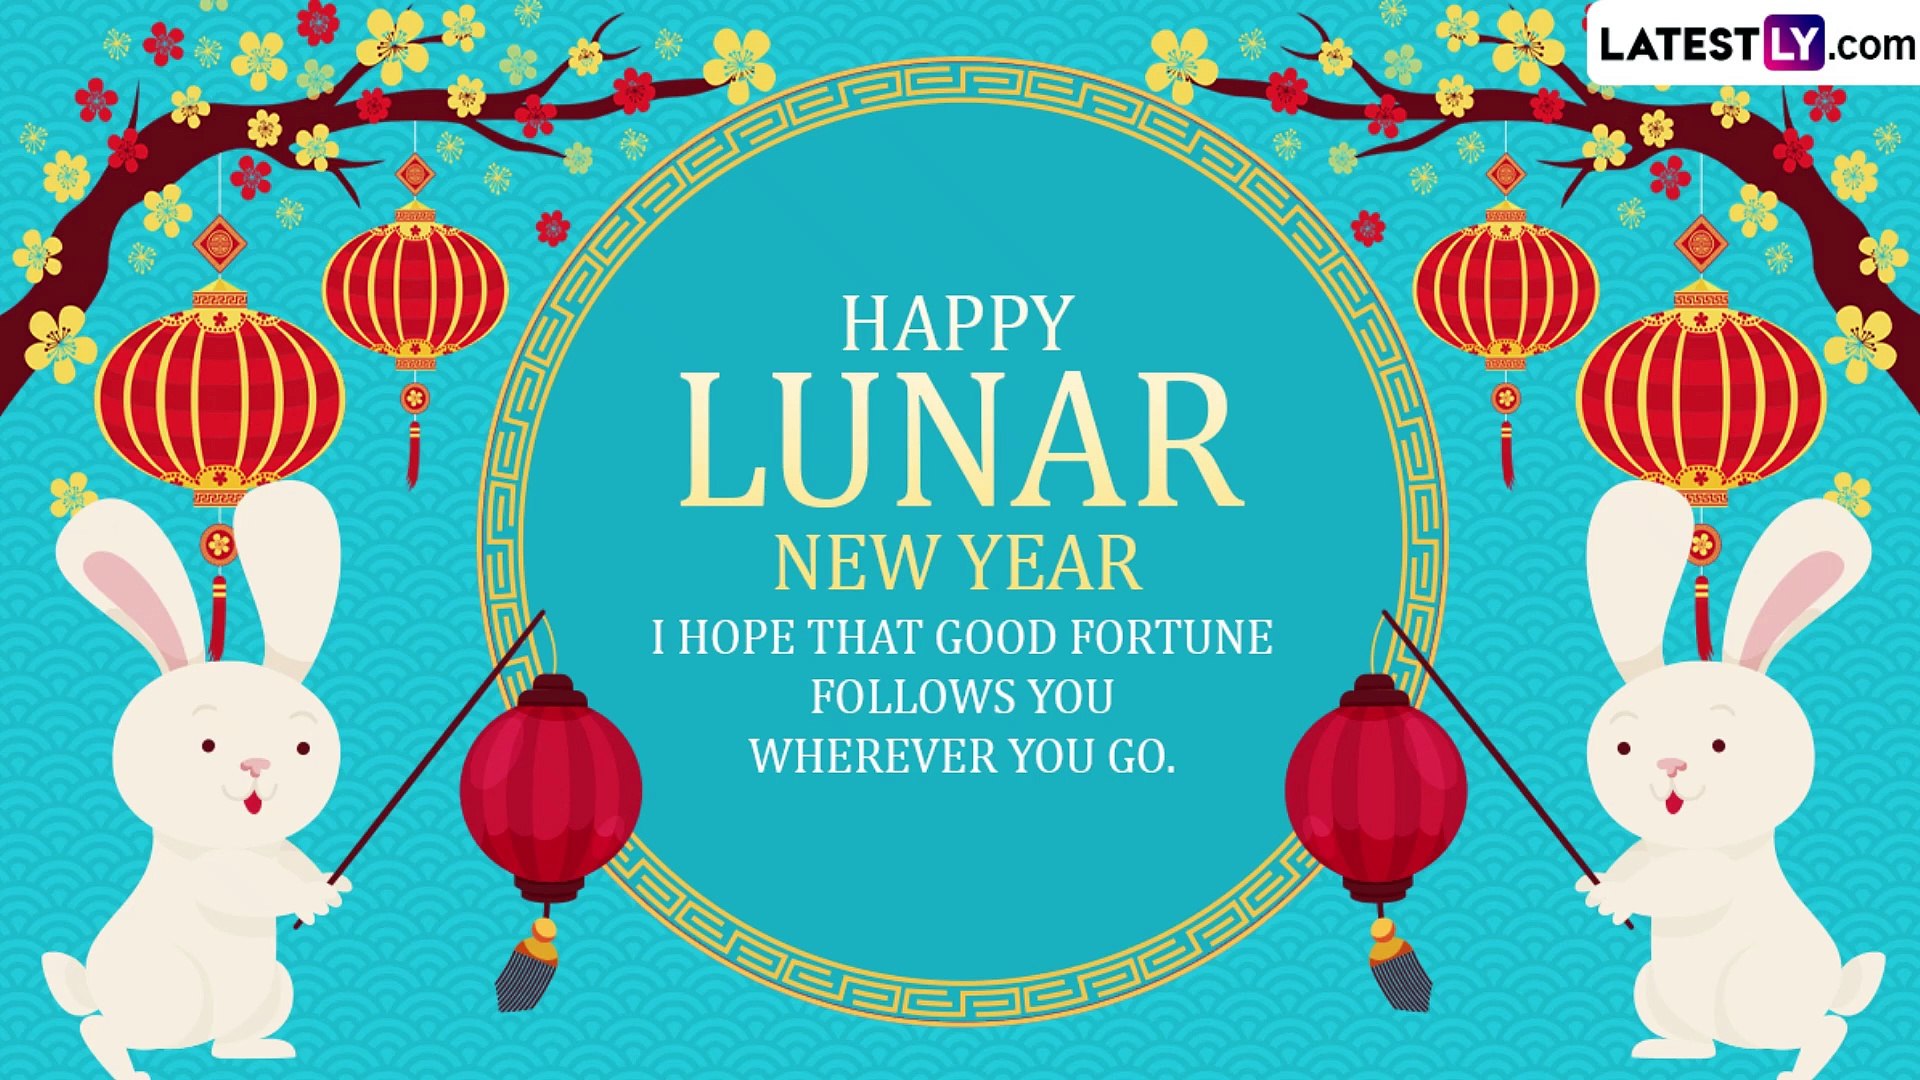 Happy Lunar New Year 2023 Greetings and Gong Xi Fa Cai Messages